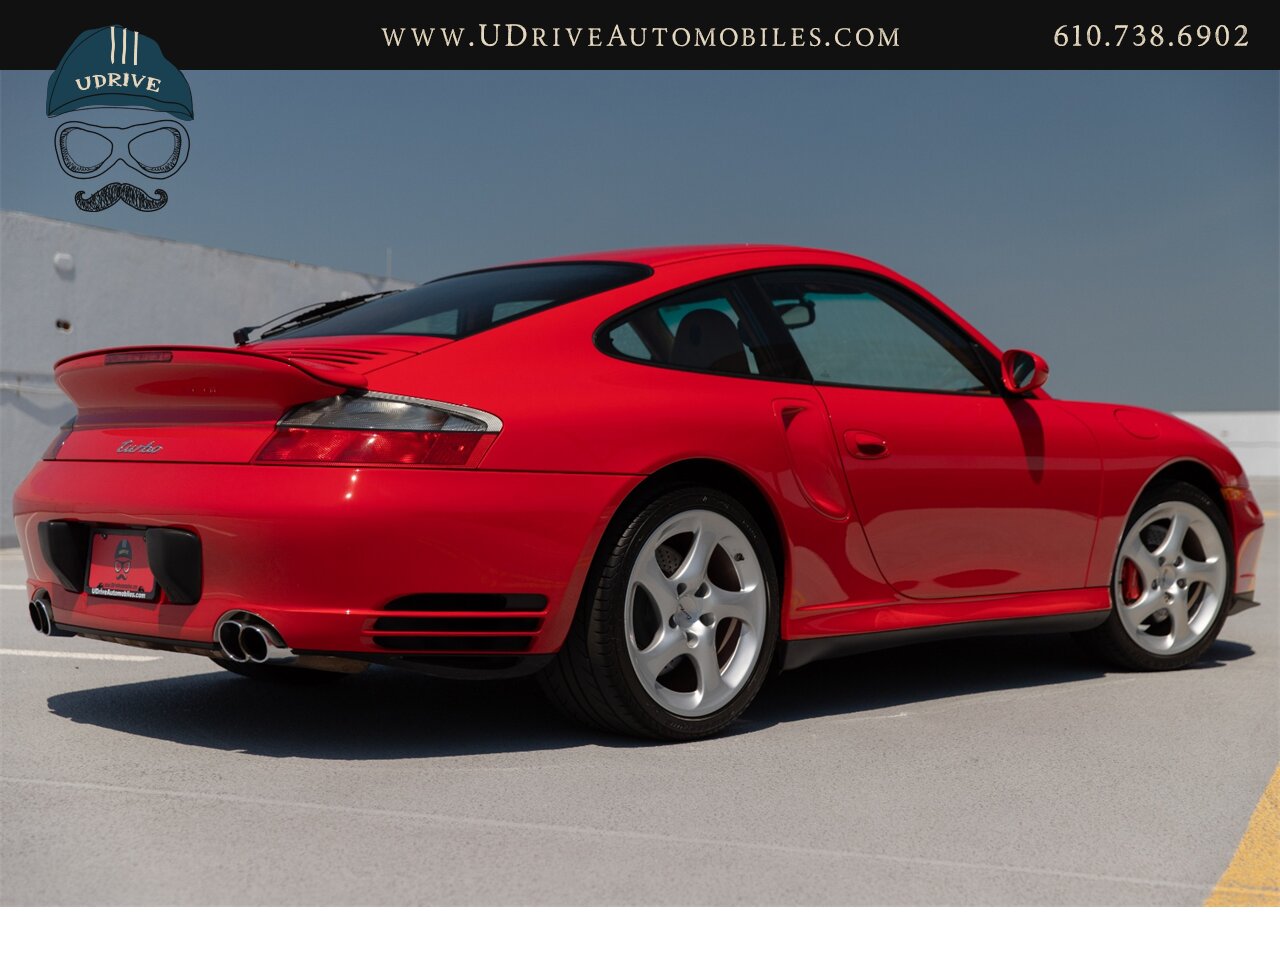 2003 Porsche 911 Turbo 996 Turbo X50 Power Kit 6 Speed Manual  Rare Color Guards Red over Brown Natural Leather - Photo 4 - West Chester, PA 19382